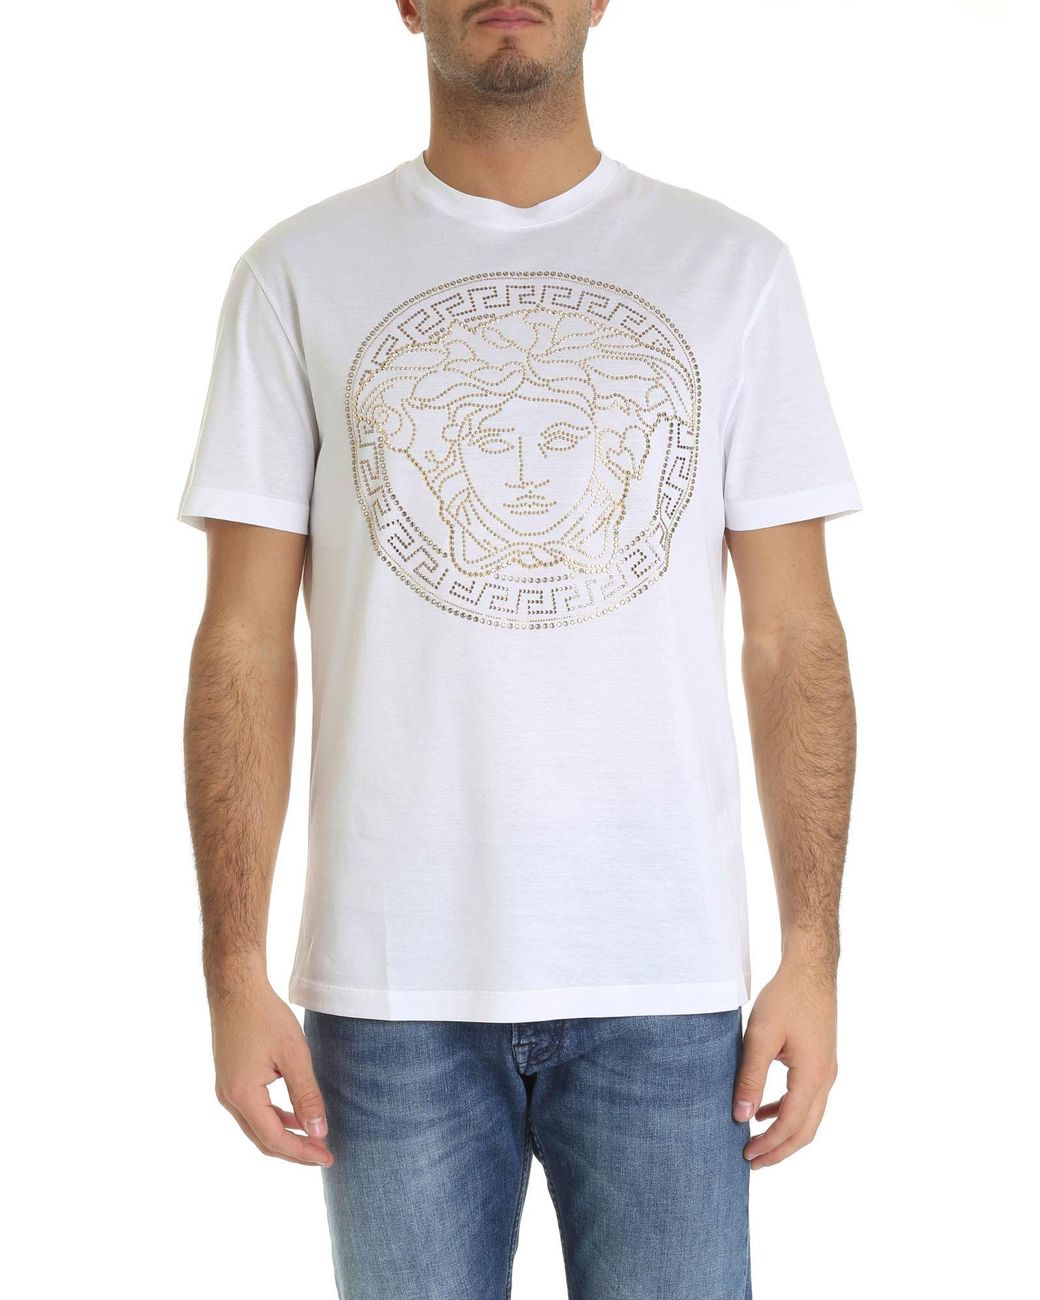 Versace Cotton Crystal Embellished T-shirt in White for Men - Lyst